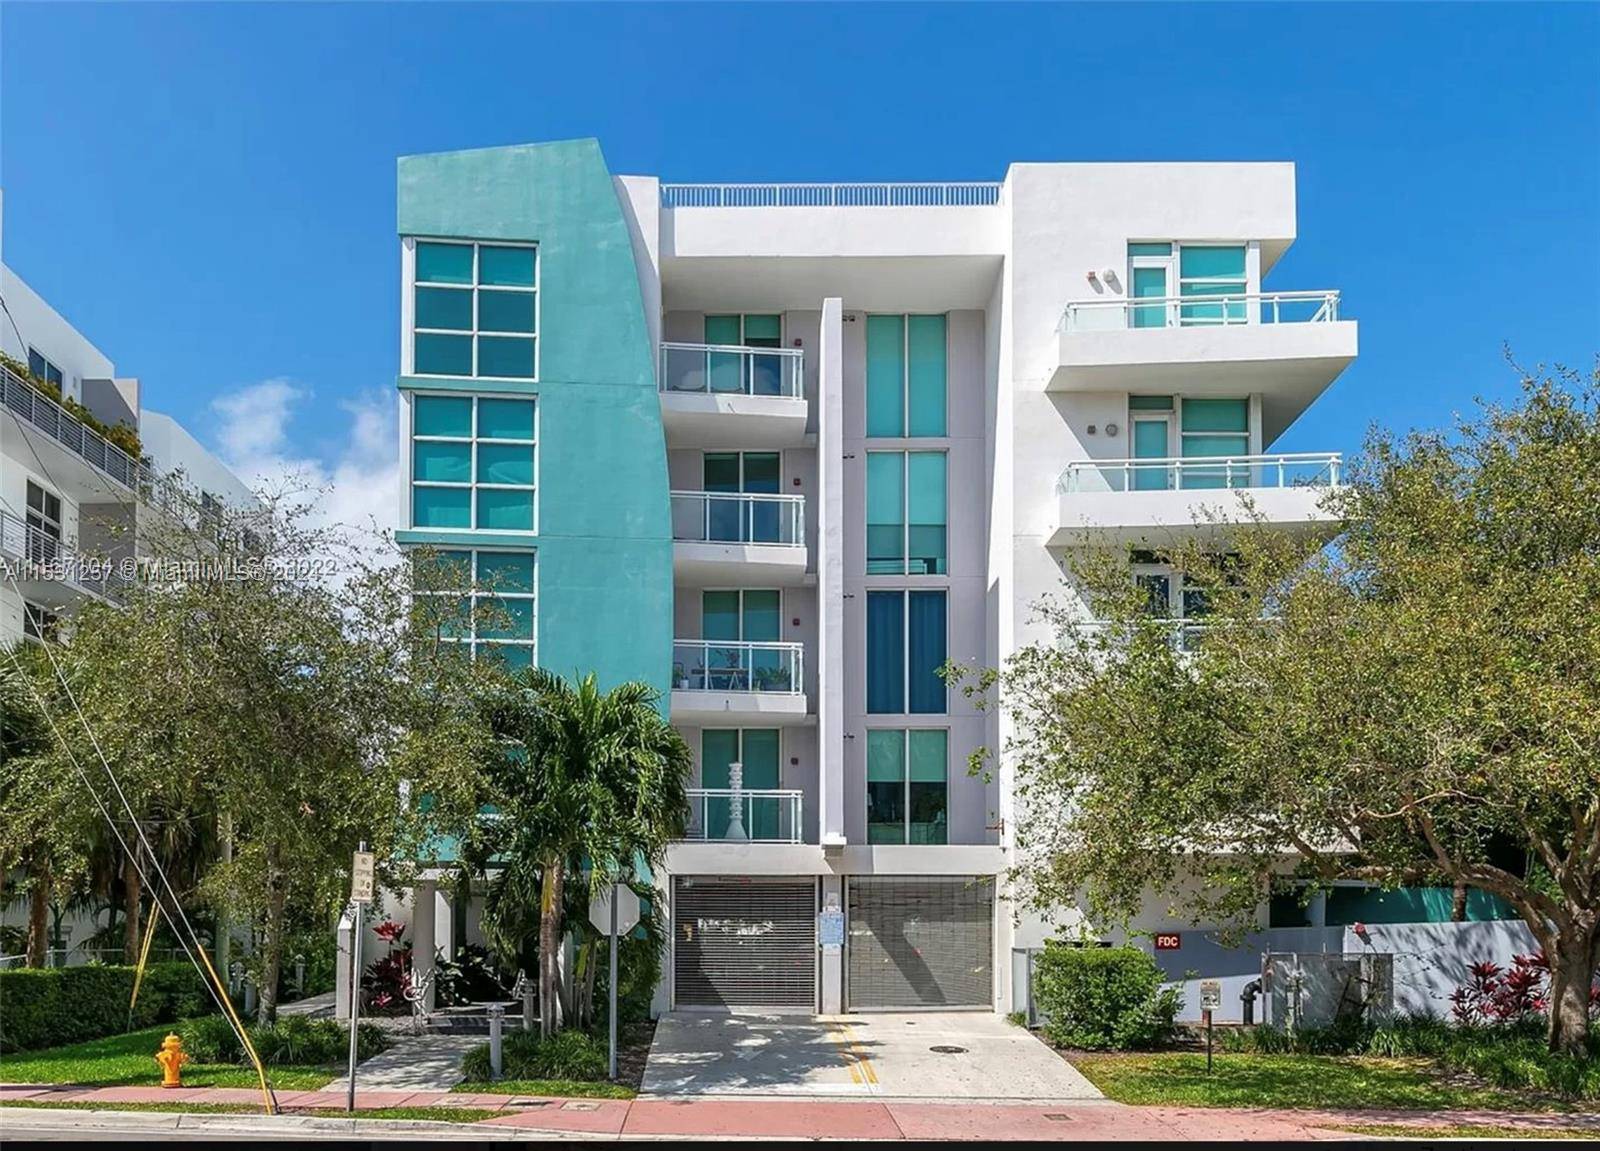 HIDDEN GEM A small and stylish building with only 20 units, conveniently located between a golf course, Lincoln Road and the beaches.